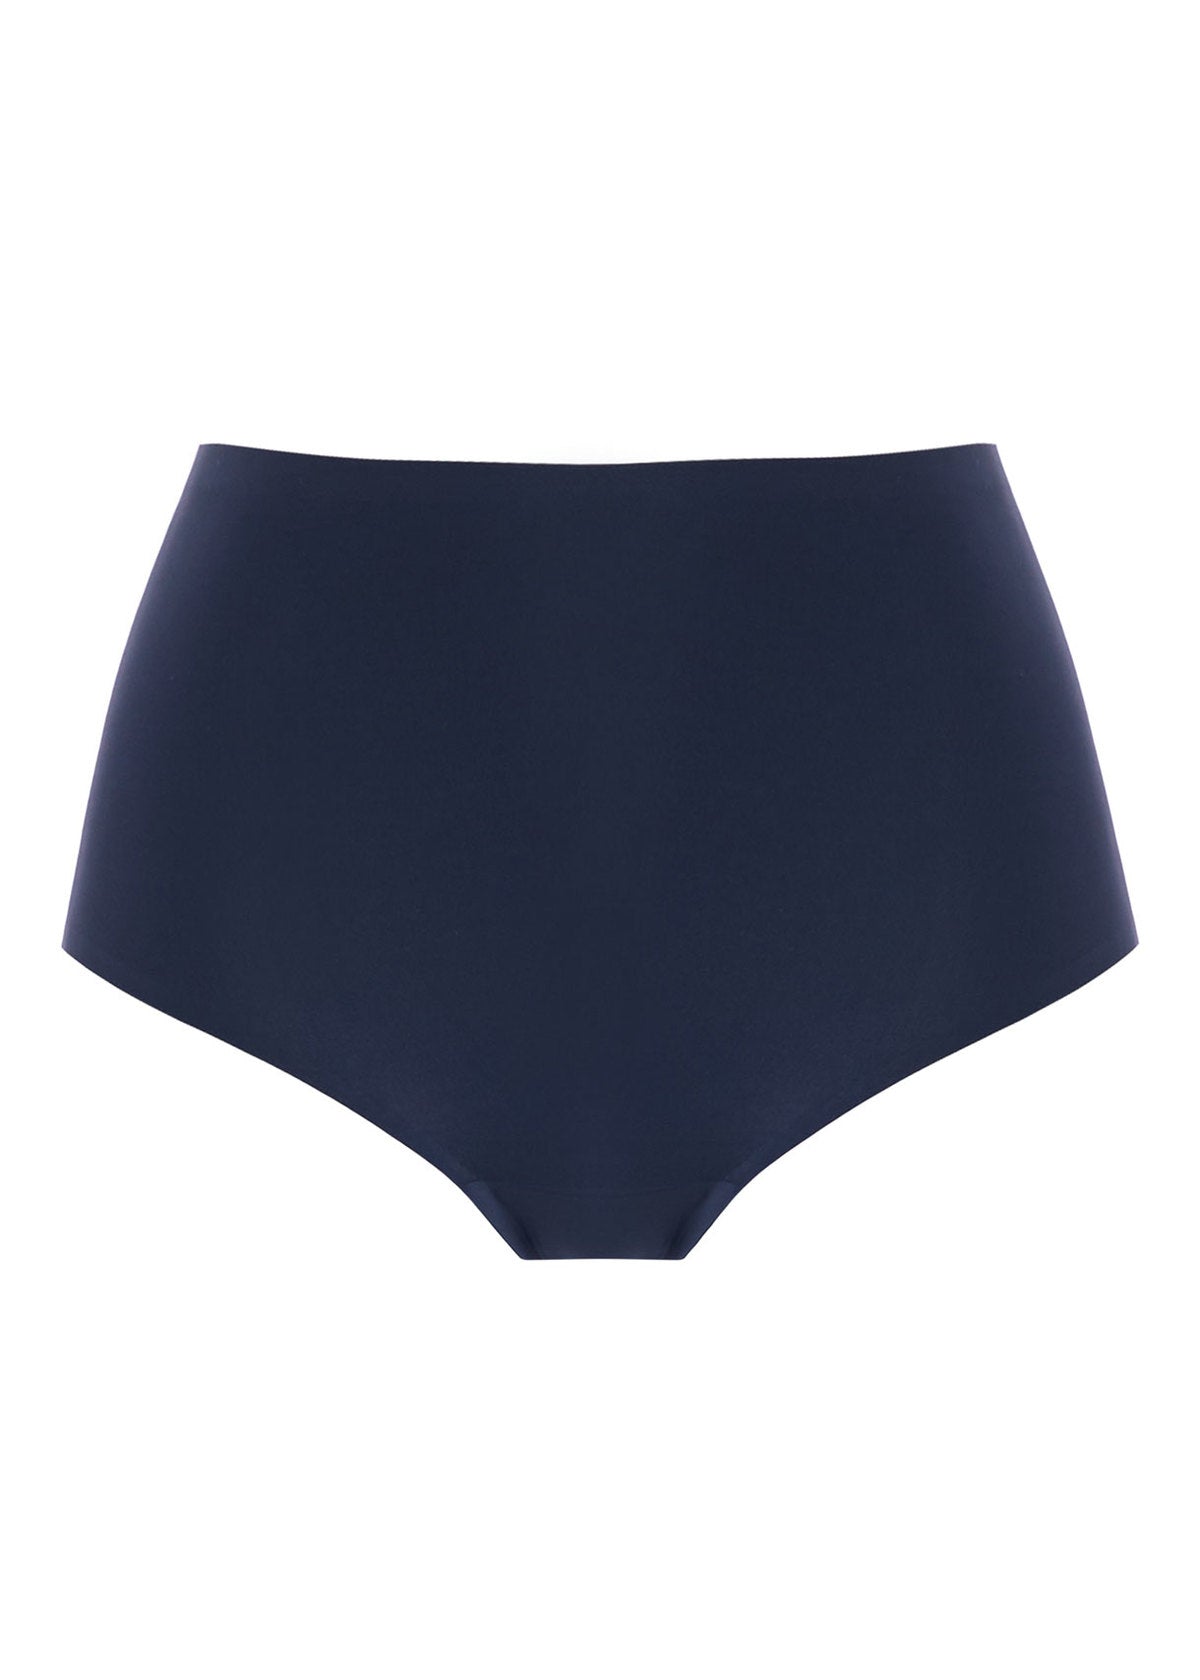 Fantasie Smoothease Invisible Stretch Full Brief - Navy 3 Shaws Department Stores